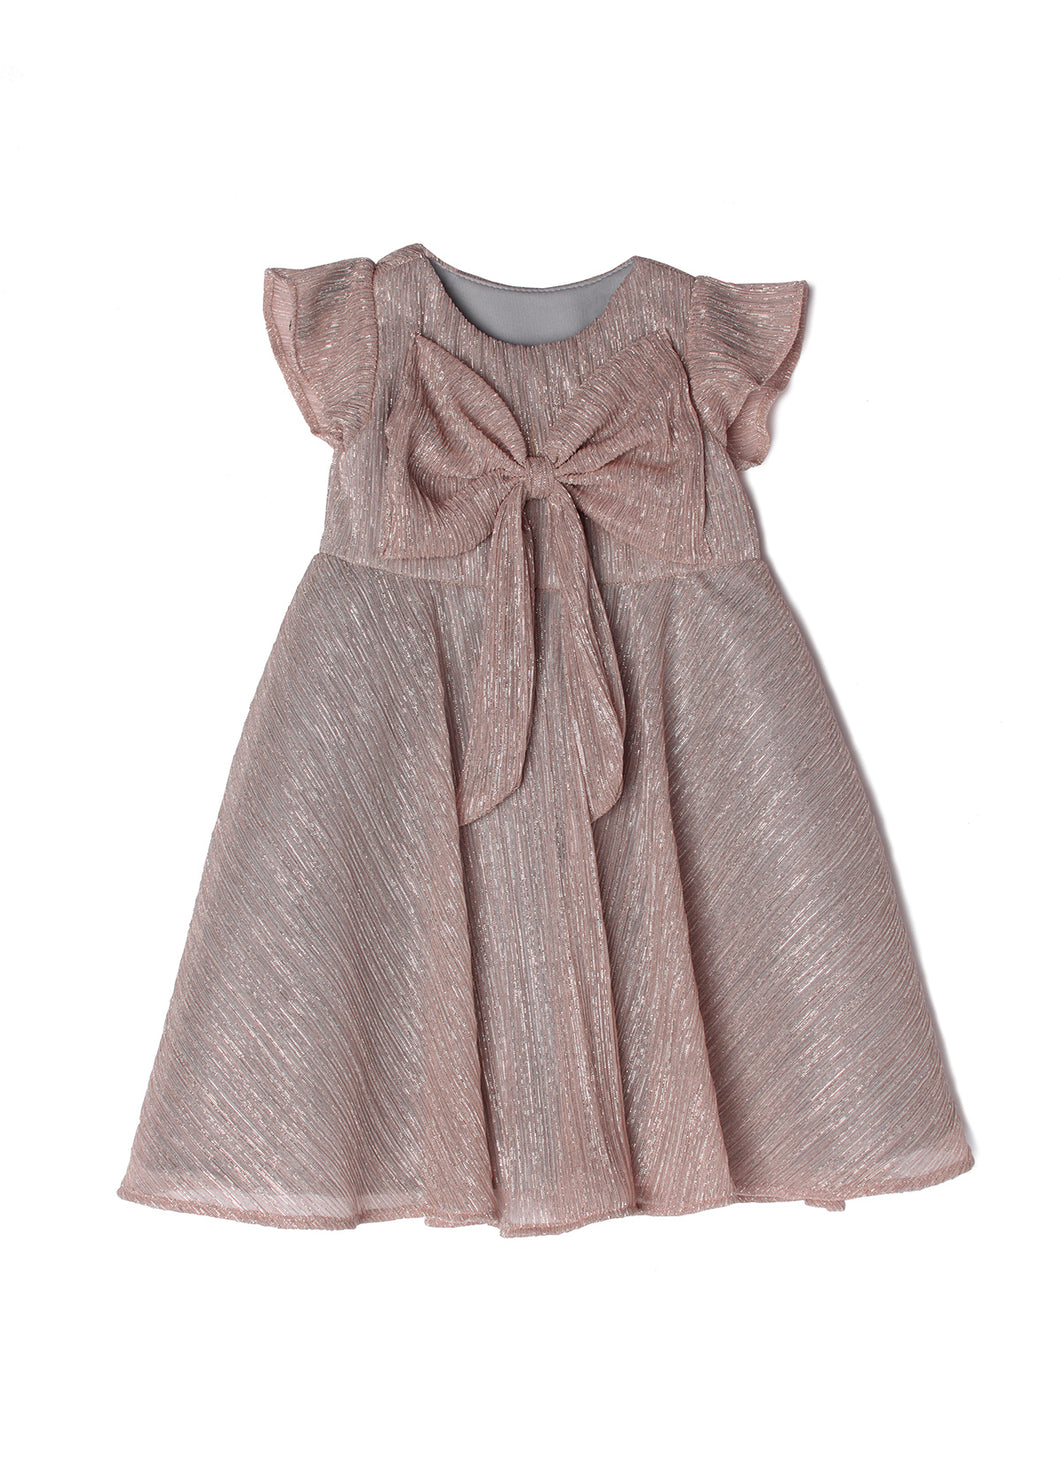 Isobella and Chloe Dazzling Darling Dress - Rose Gold - Bloom Kids Collection - Isobella and Chloe